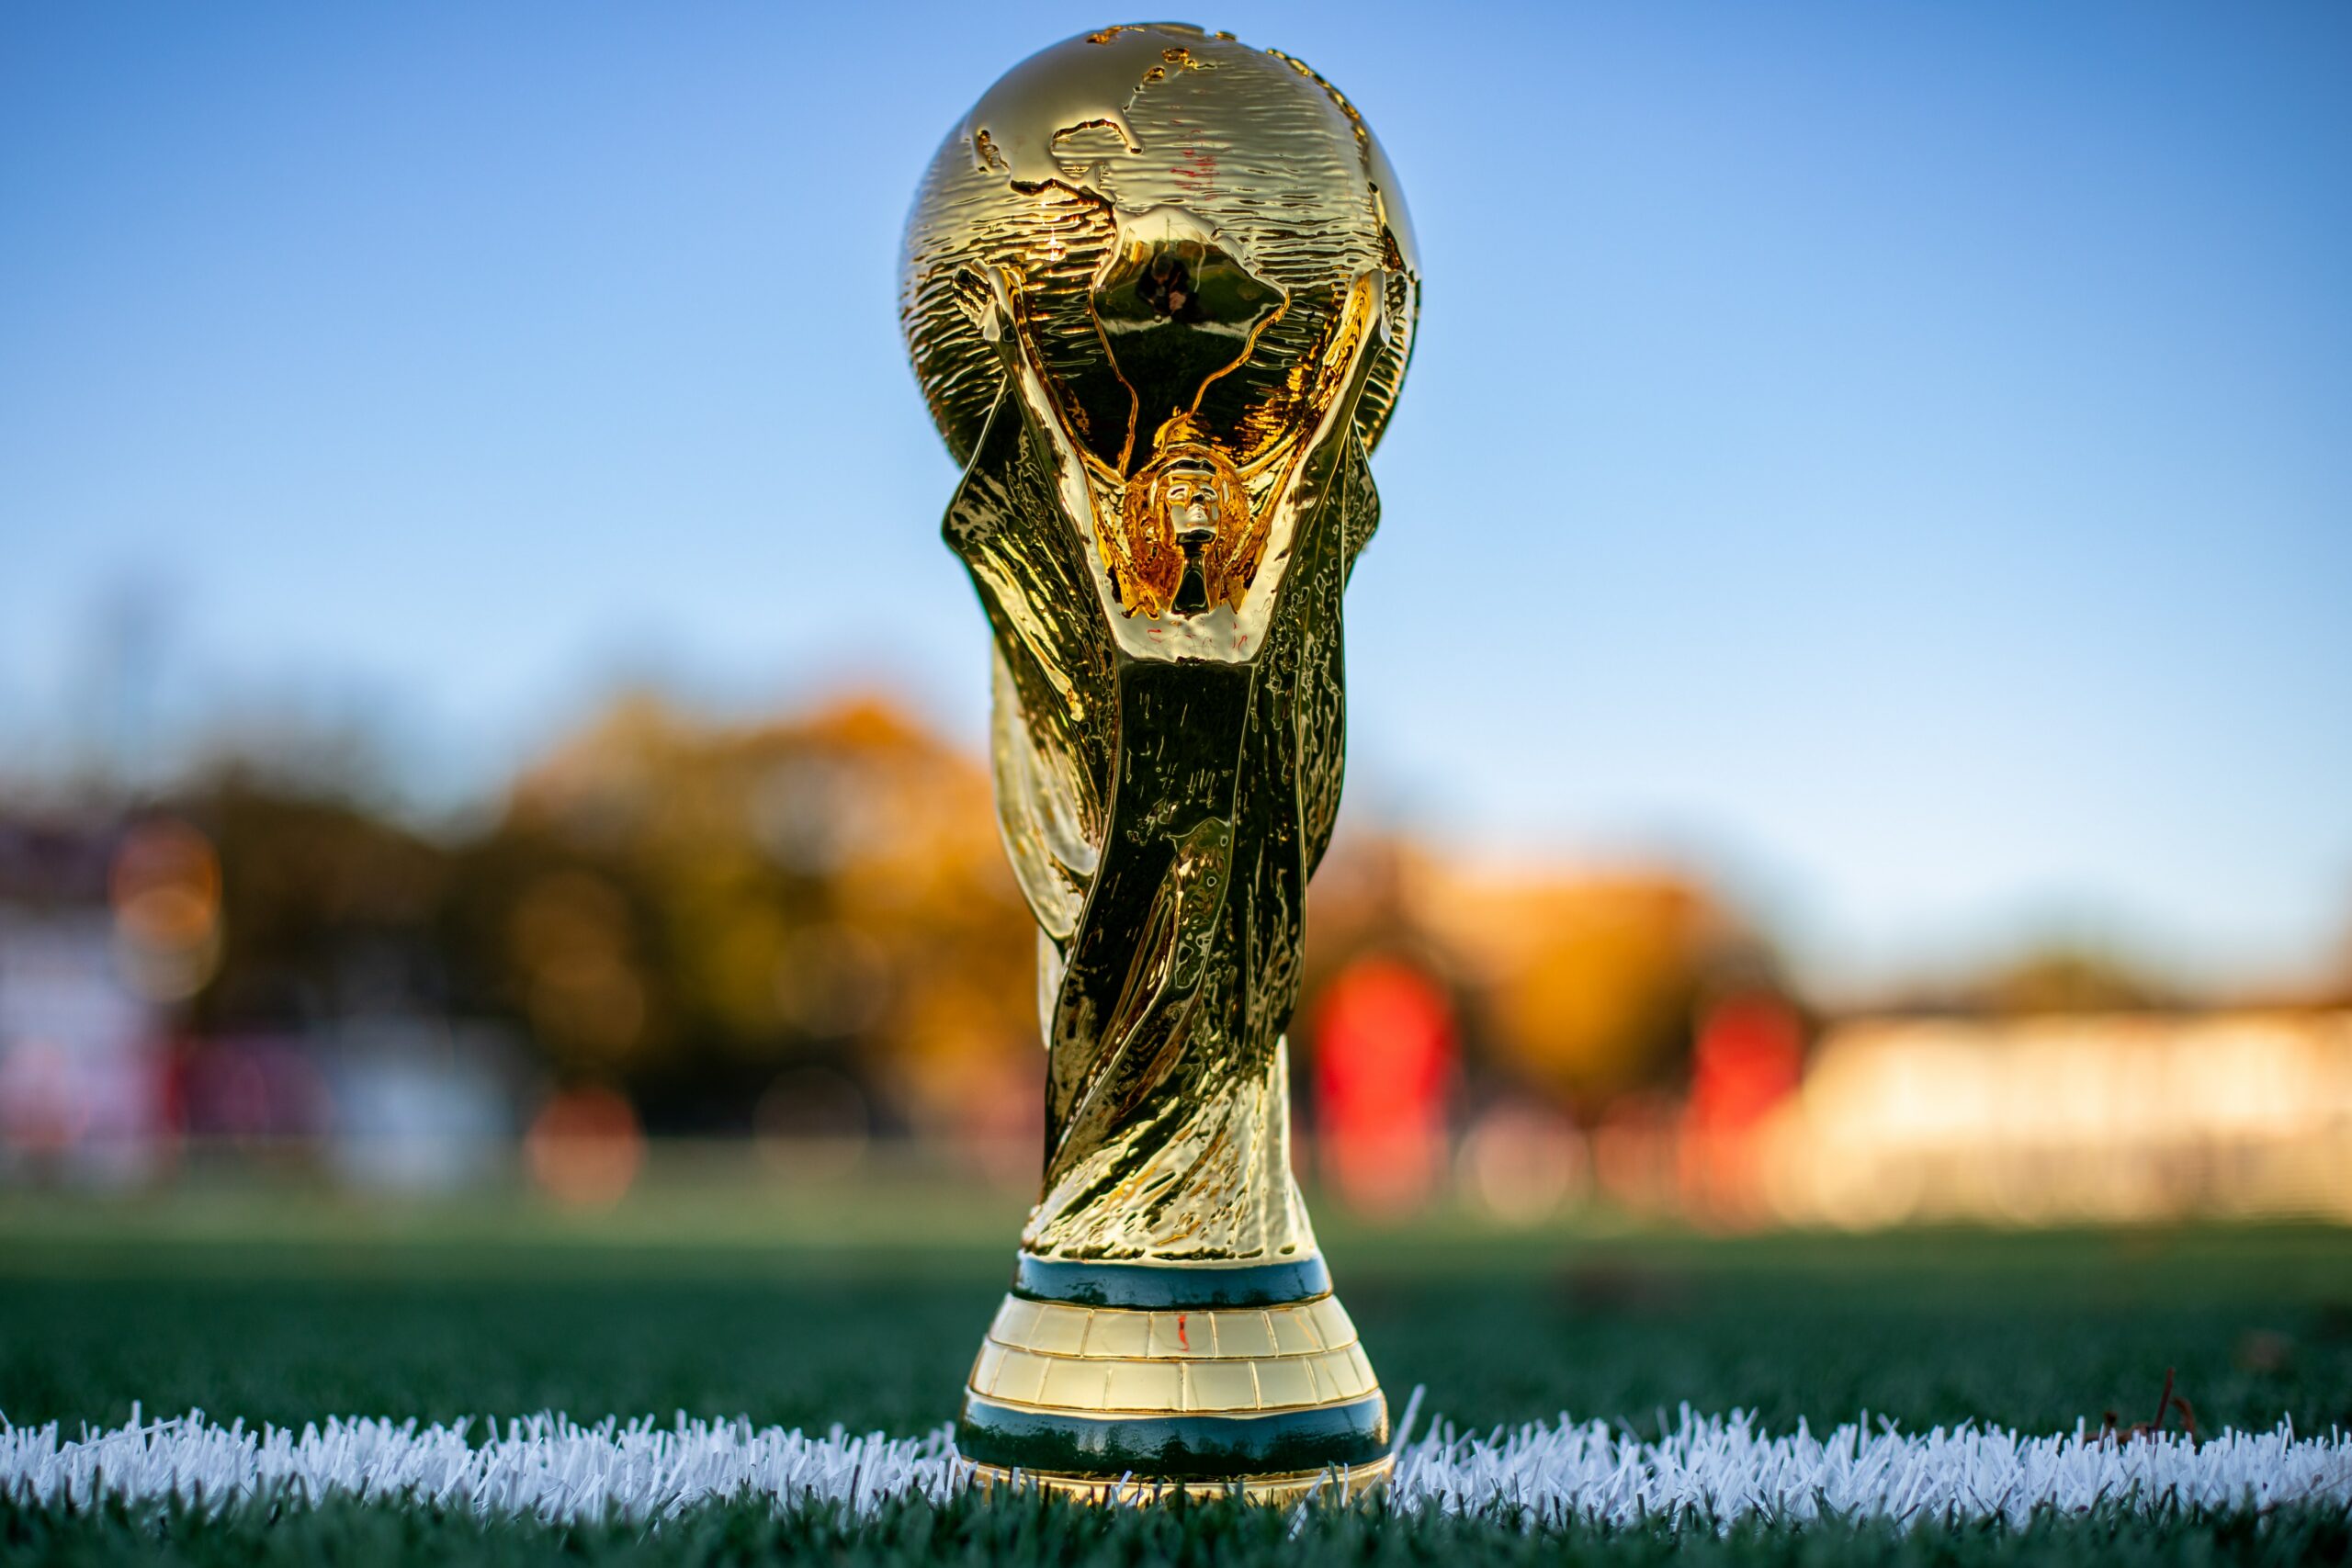 Ticketing problems cause delays for World Cup fans